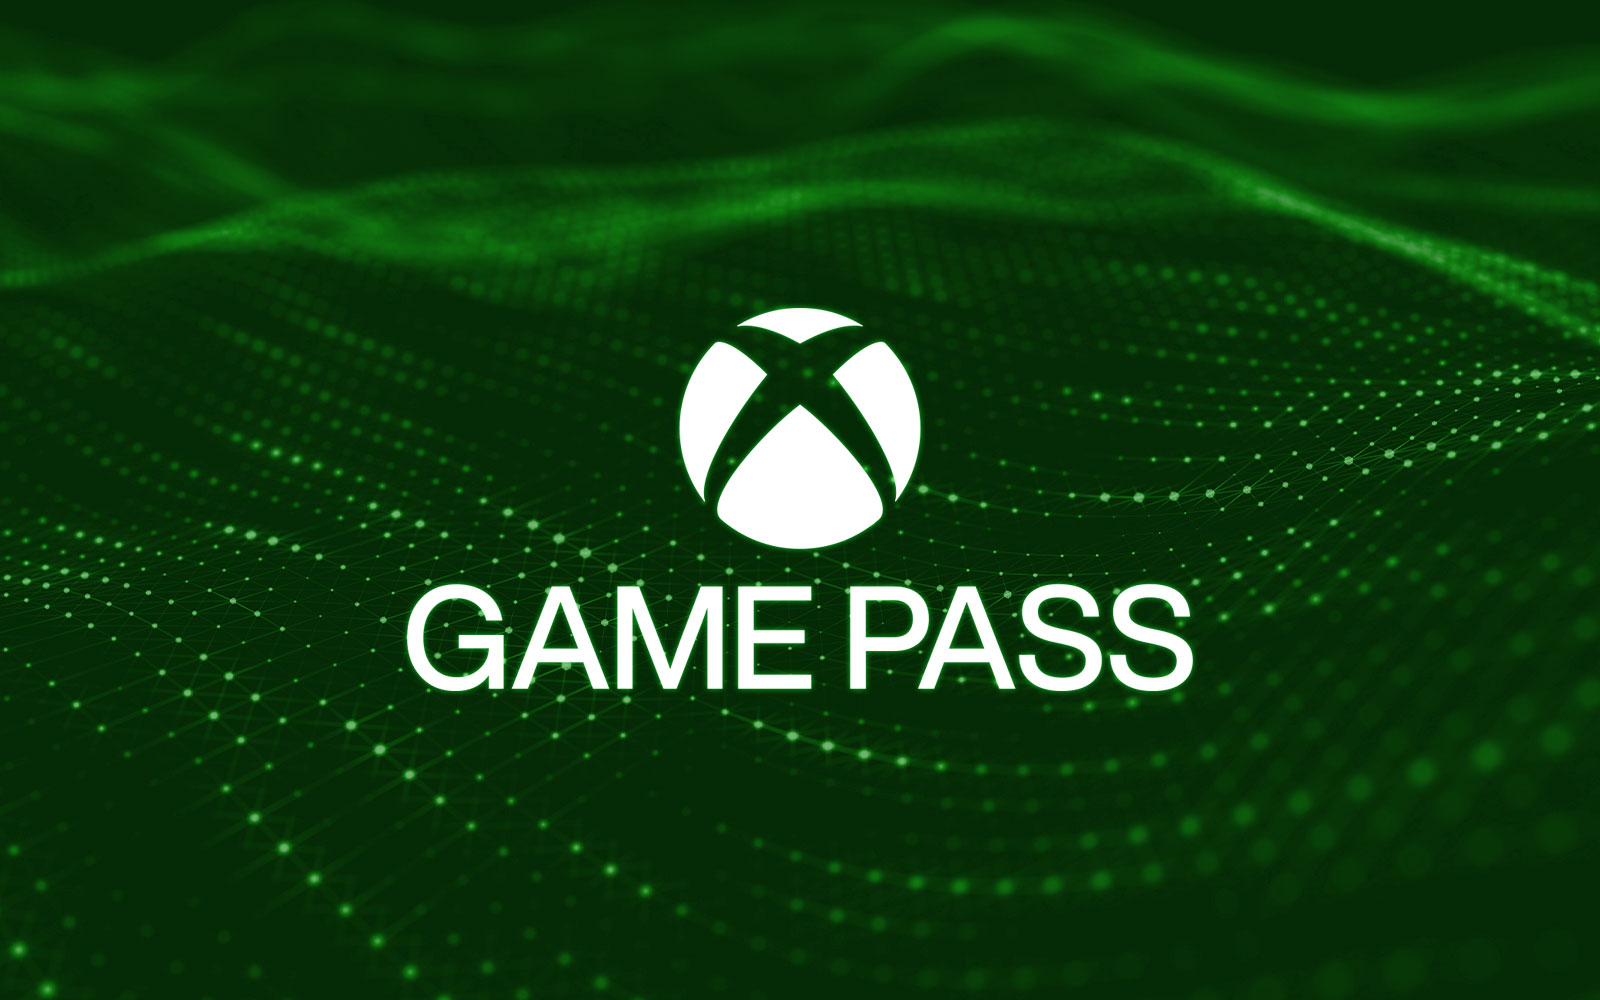 Xbox Game Pass will no longer receive new games in 2022. Microsoft has completed an expansion of the offer